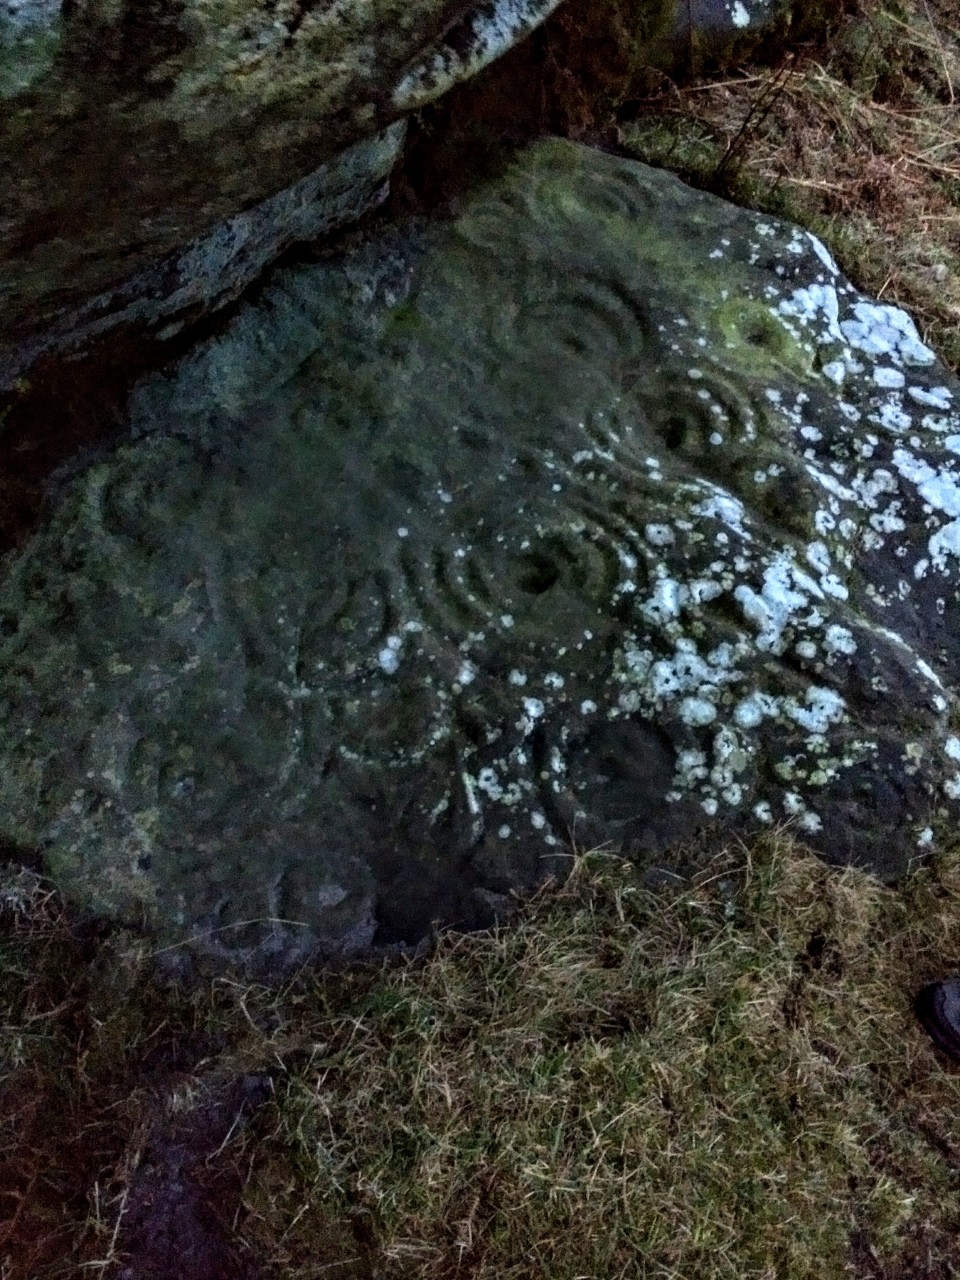 Kettley Crag (Cup and Ring Marks / Rock Art) by spencer